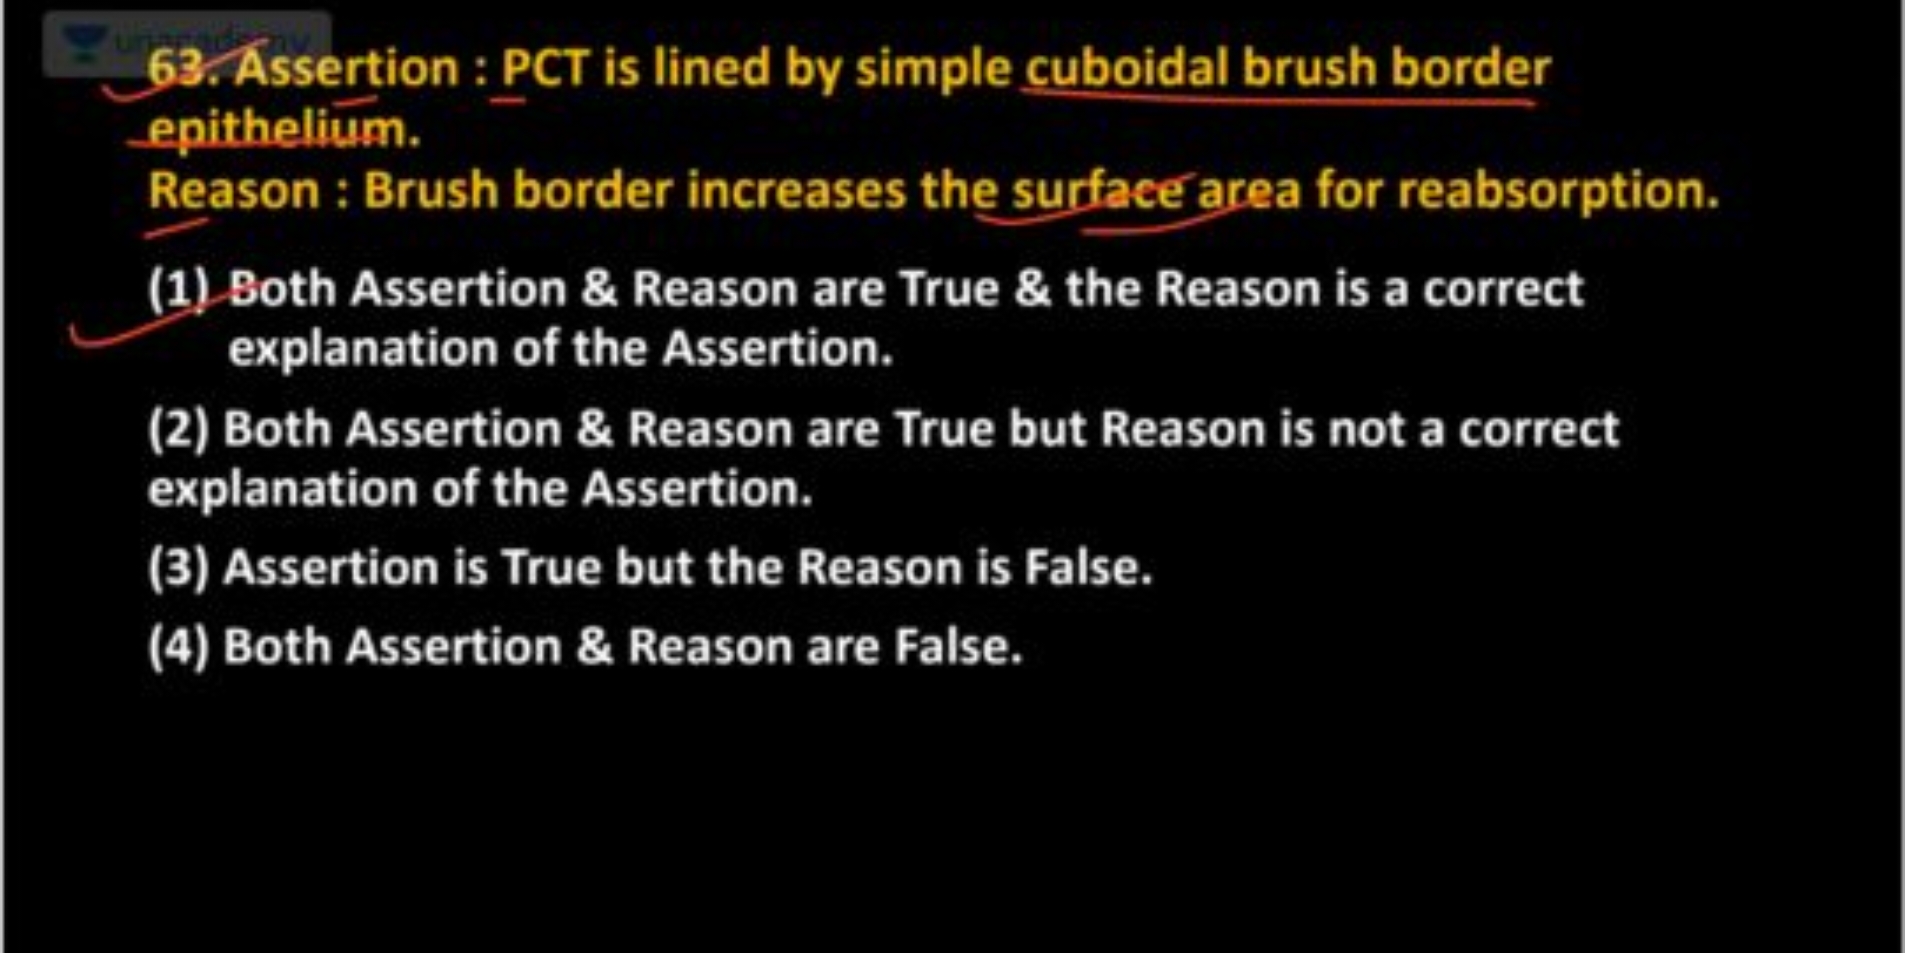 Assertion : PCT is lined by simple cuboidal brush border epithelium. R